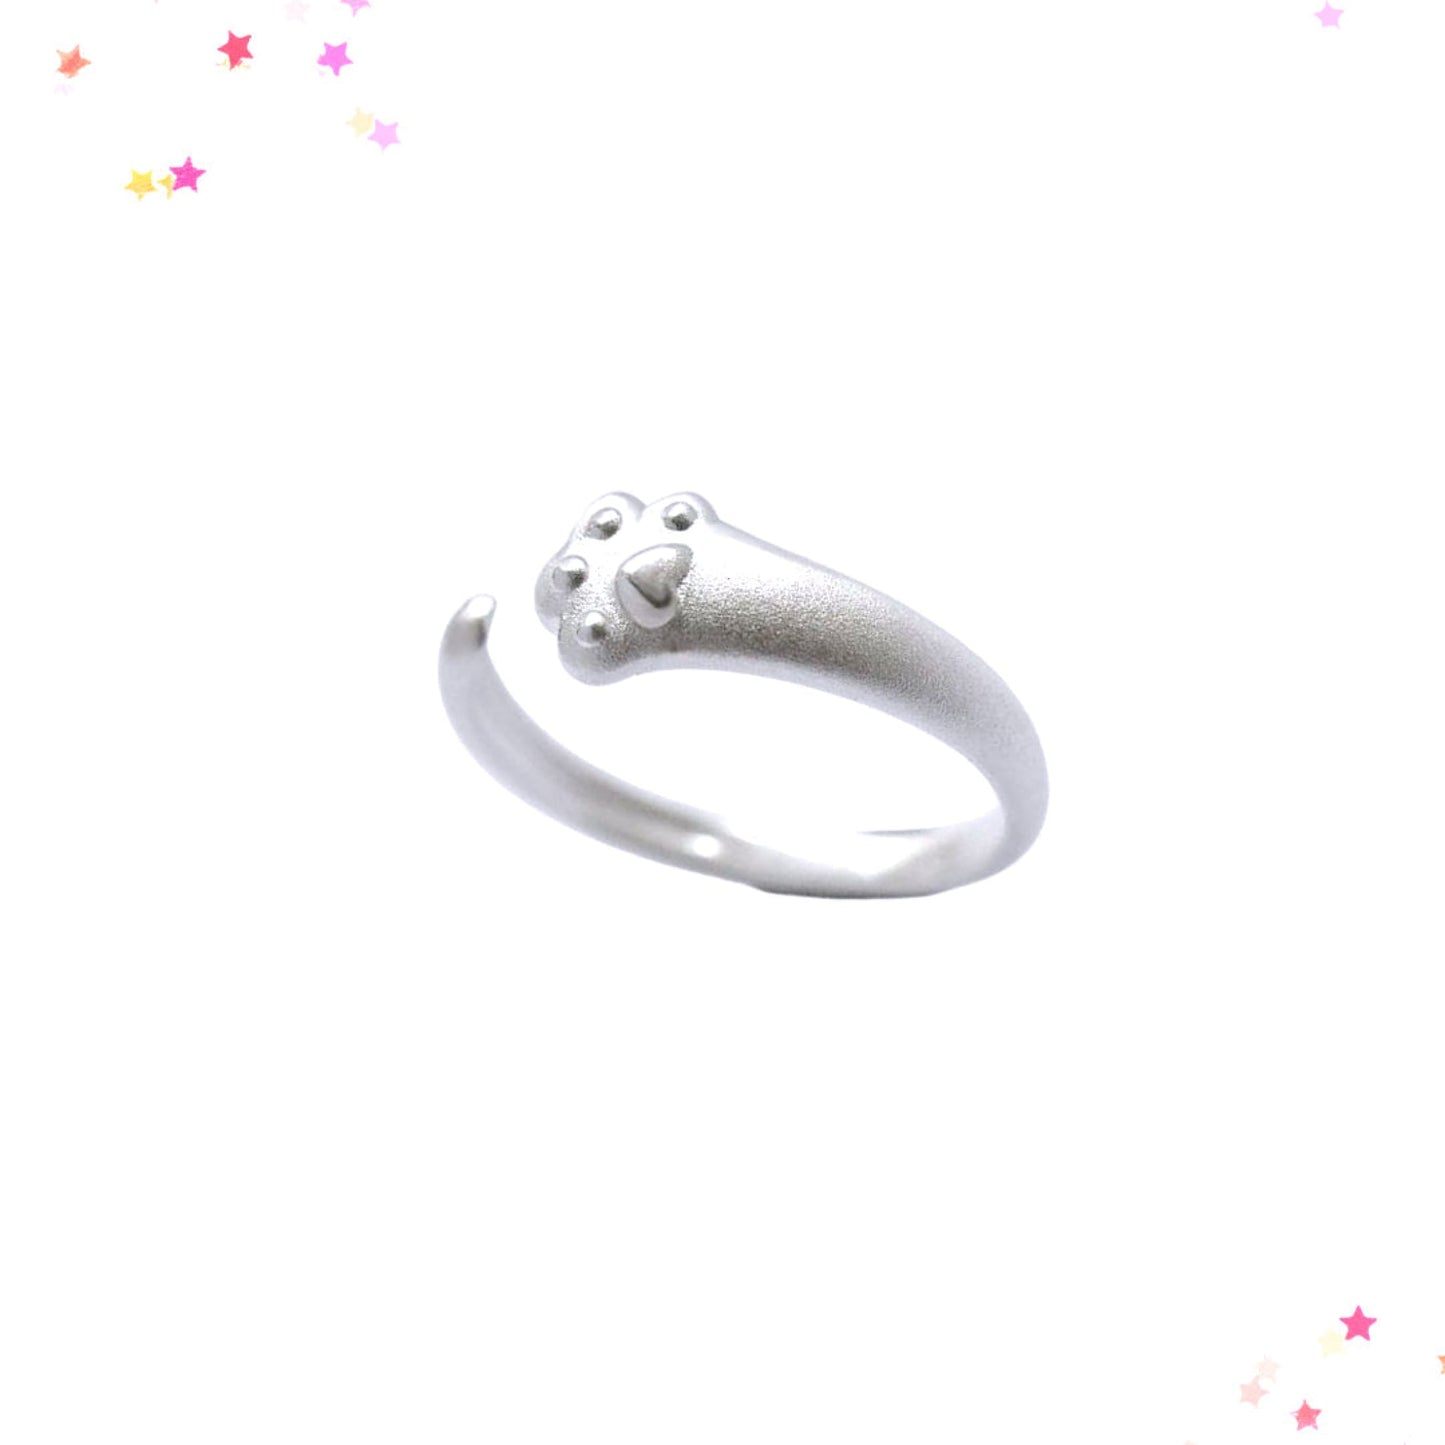 Silver Cat Paw Ring from Confetti Kitty, Only 4.99